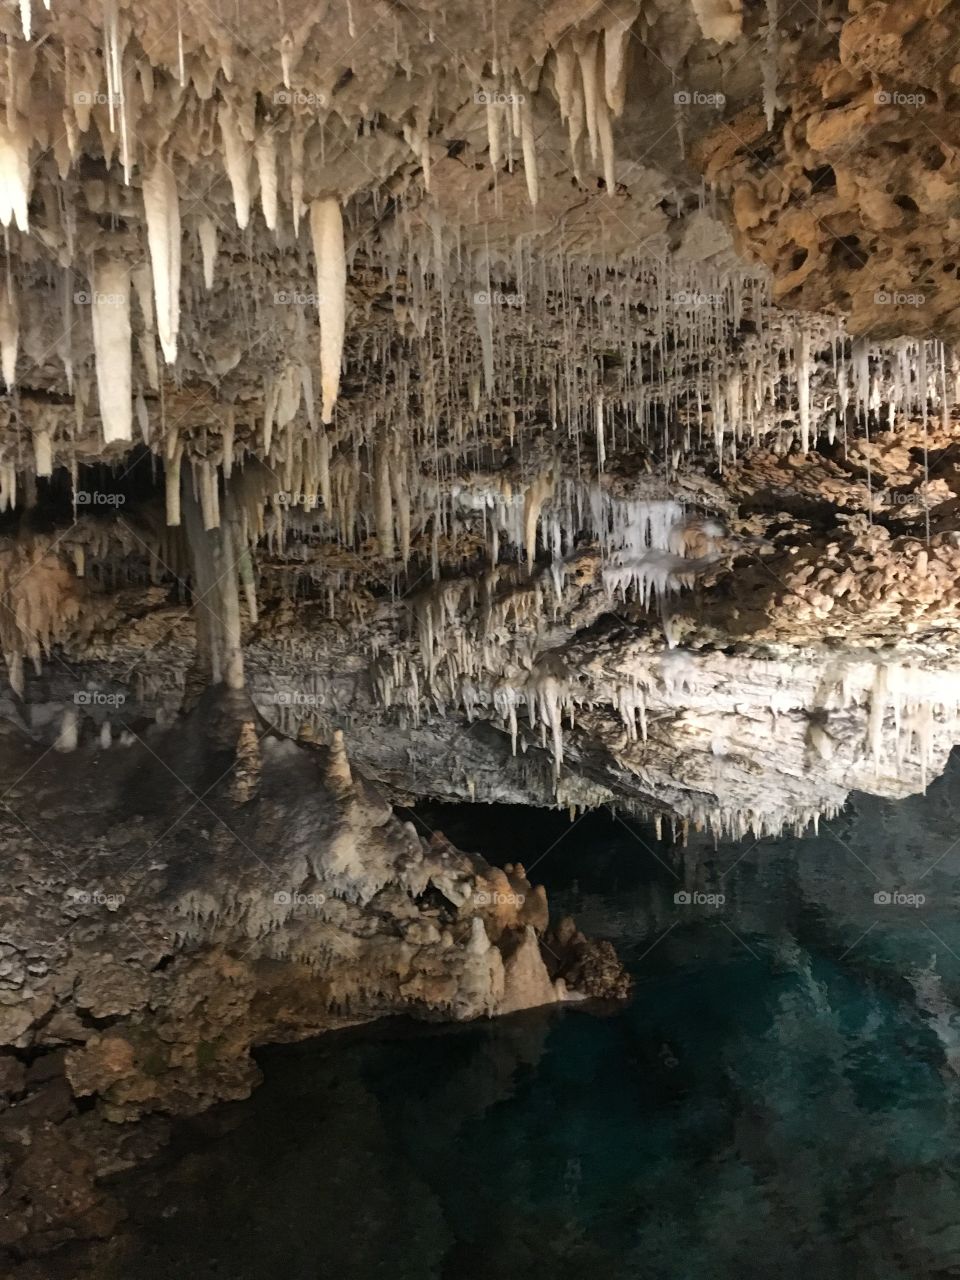 The colorless stalactites hang down from the calcium ceiling and contrast against the dark, crystal clear water below.